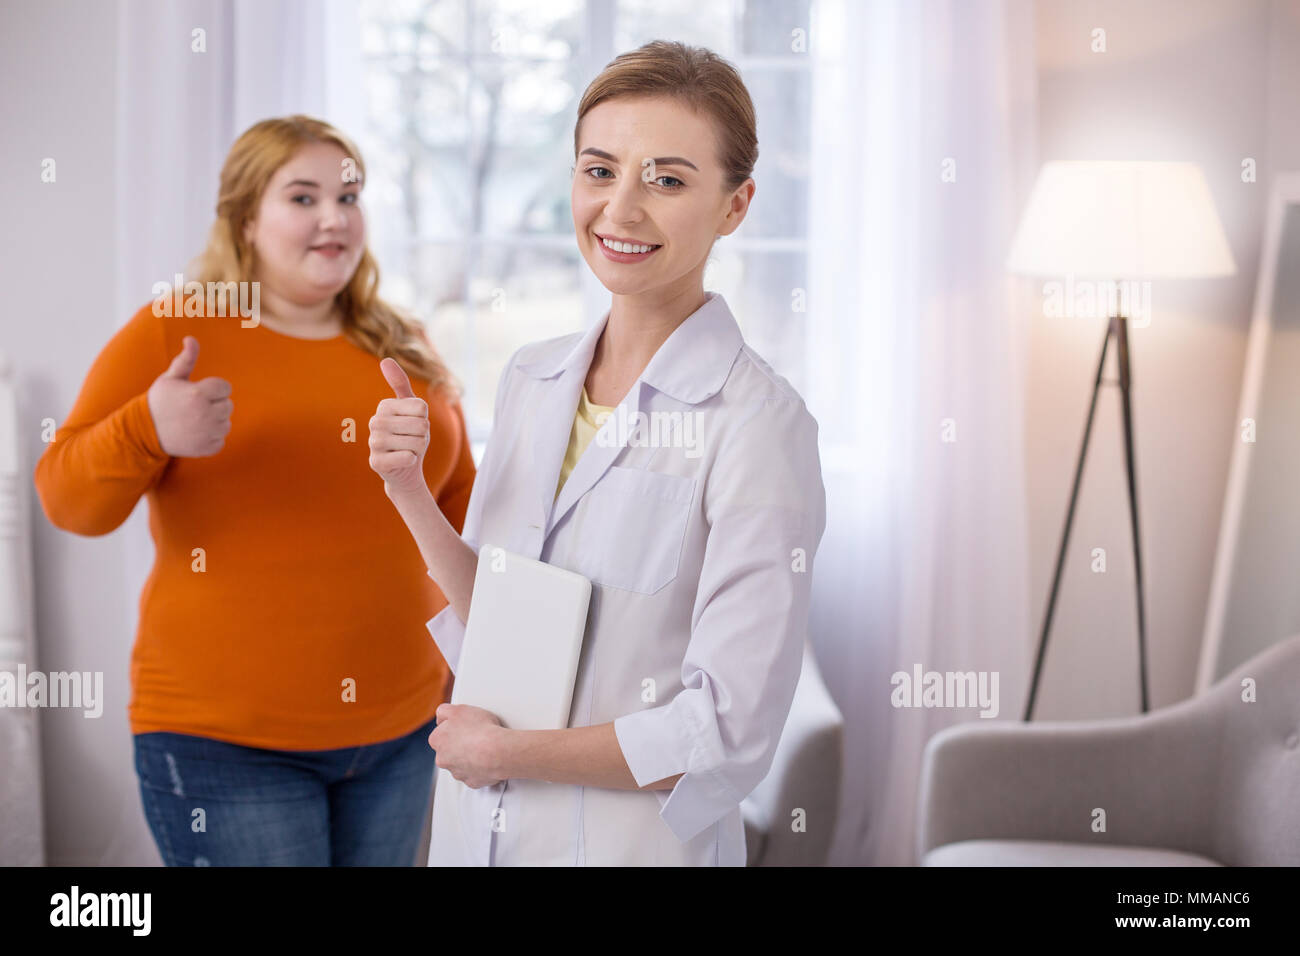 Cheerful nutrition specialist showing her thumb up Stock Photo